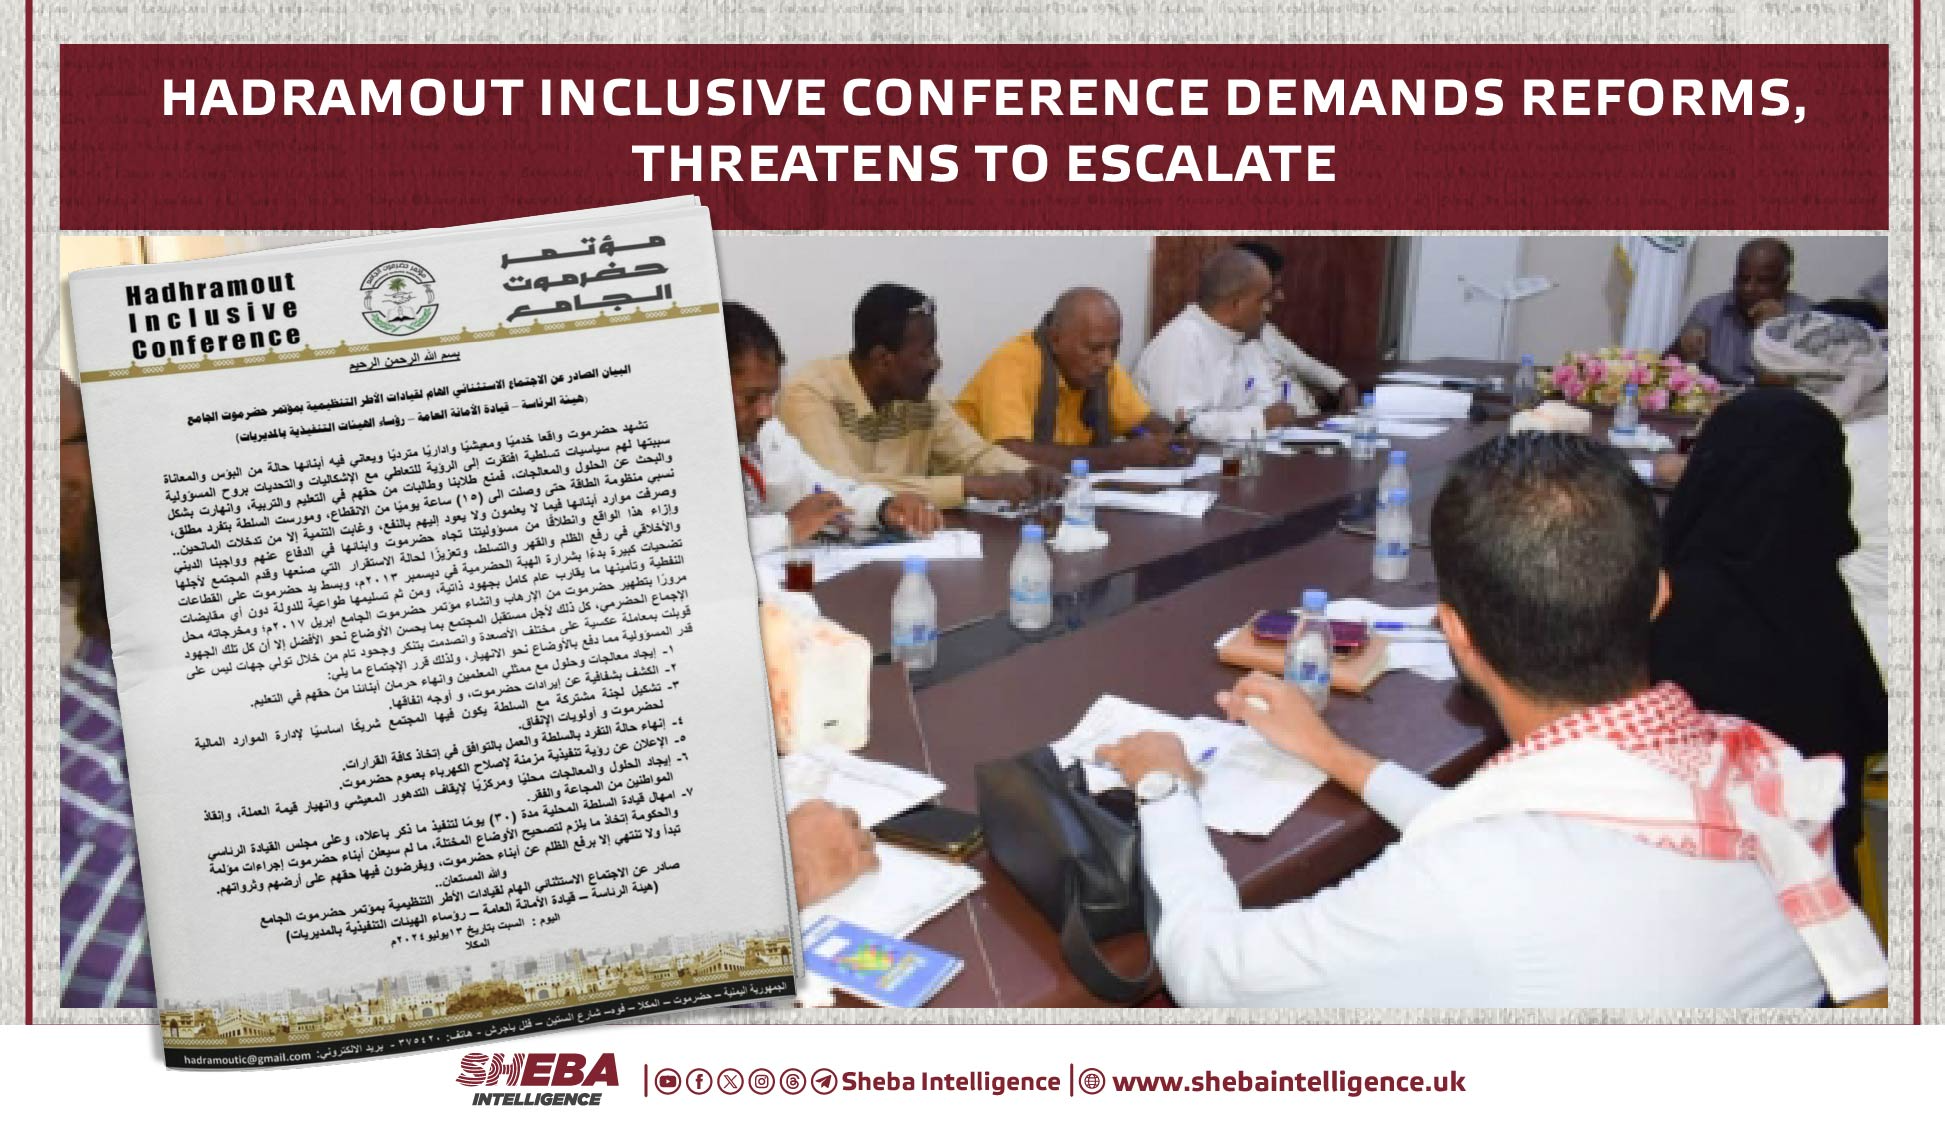 Hadramout Inclusive Conference Demands Reforms, Threatens to Escalate